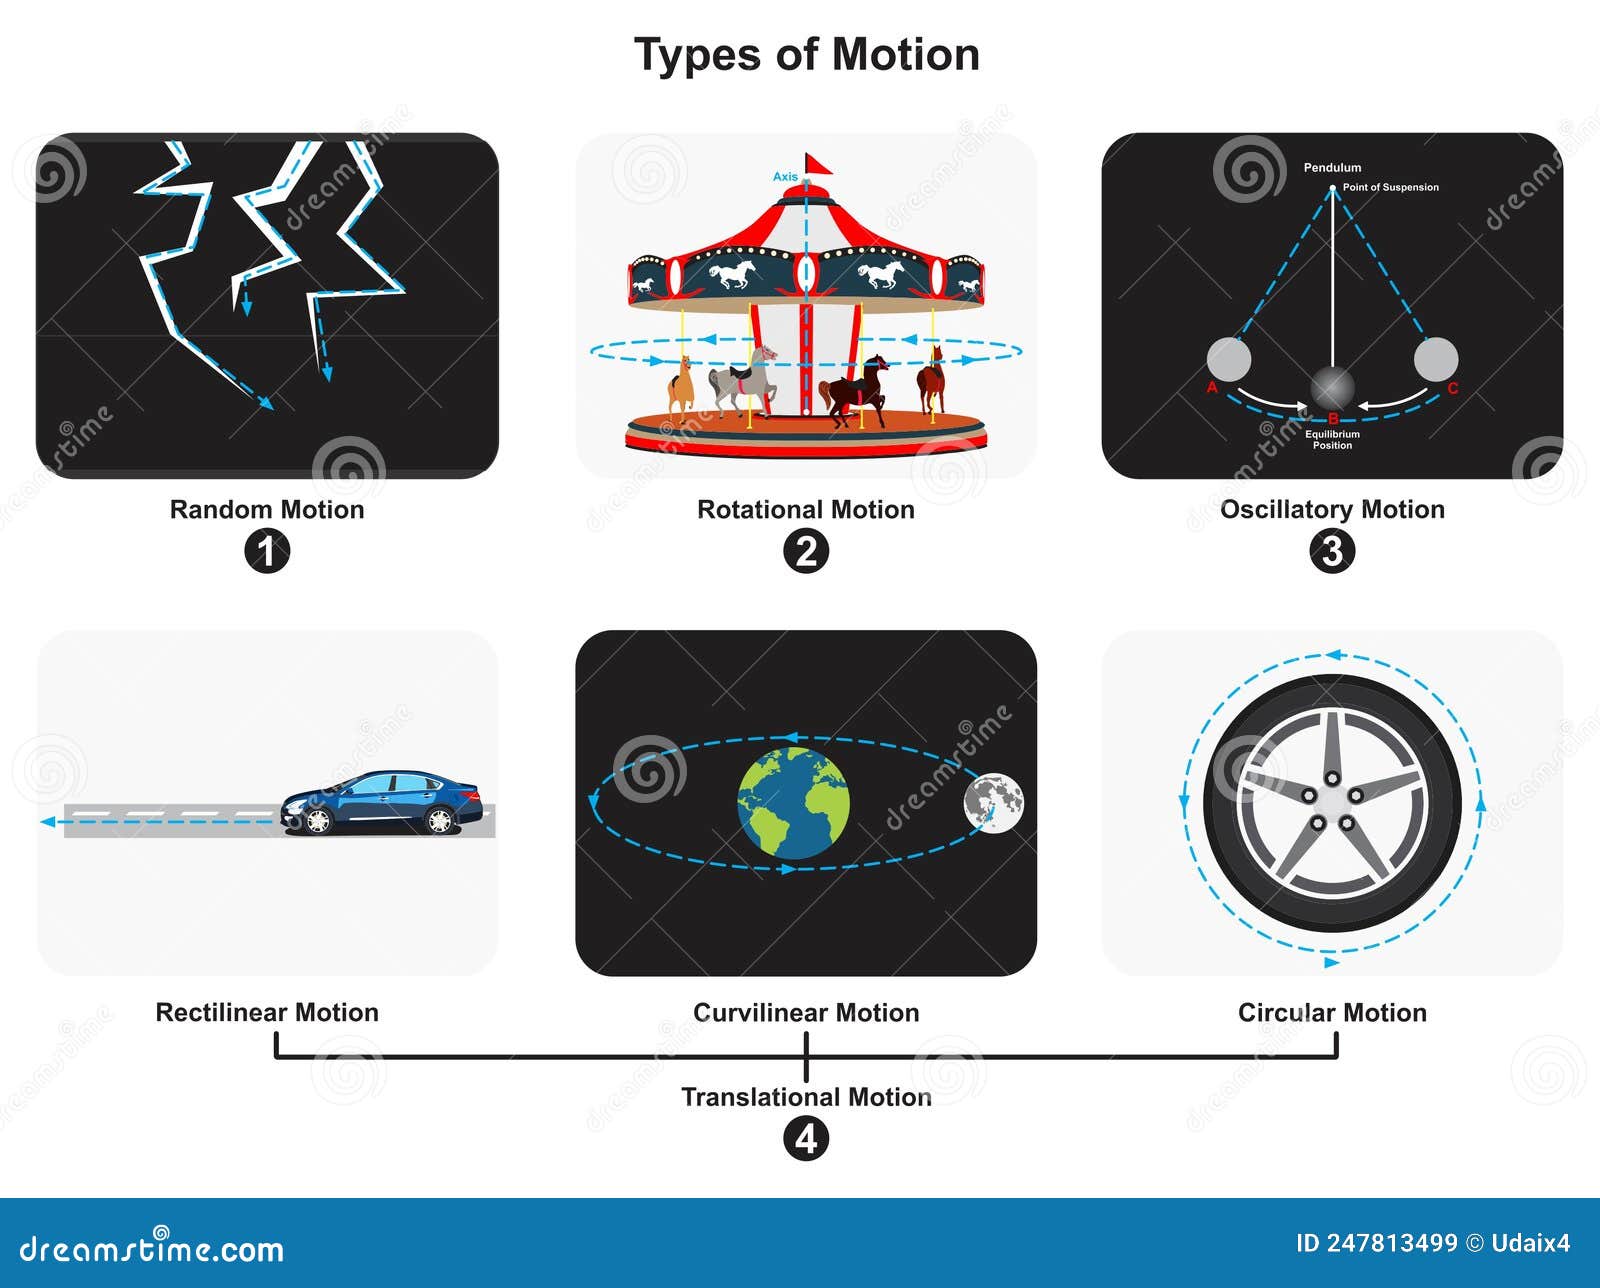 types of motion infographic diagram physics mechanics dynamics science